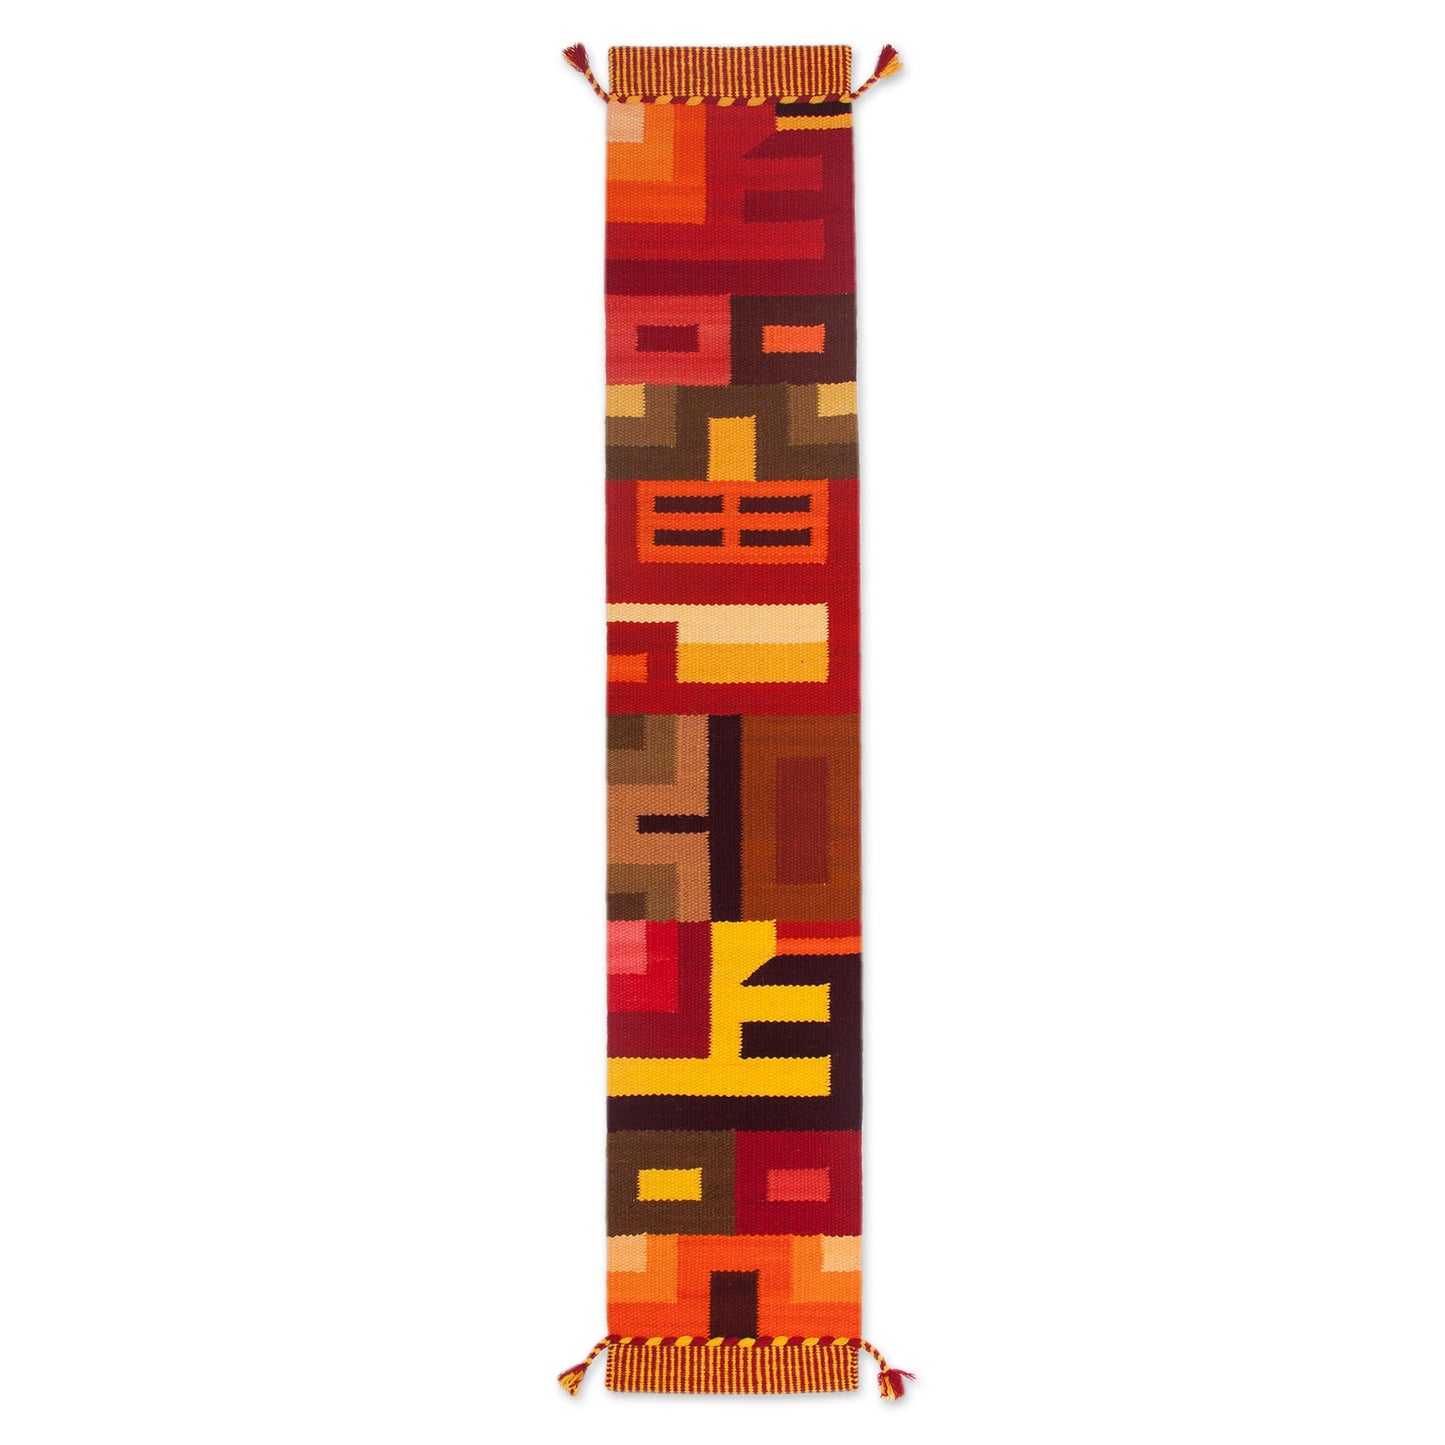 Beauty in Asymmetry Handwoven Colorful Wool Blend Table Runner from Peru